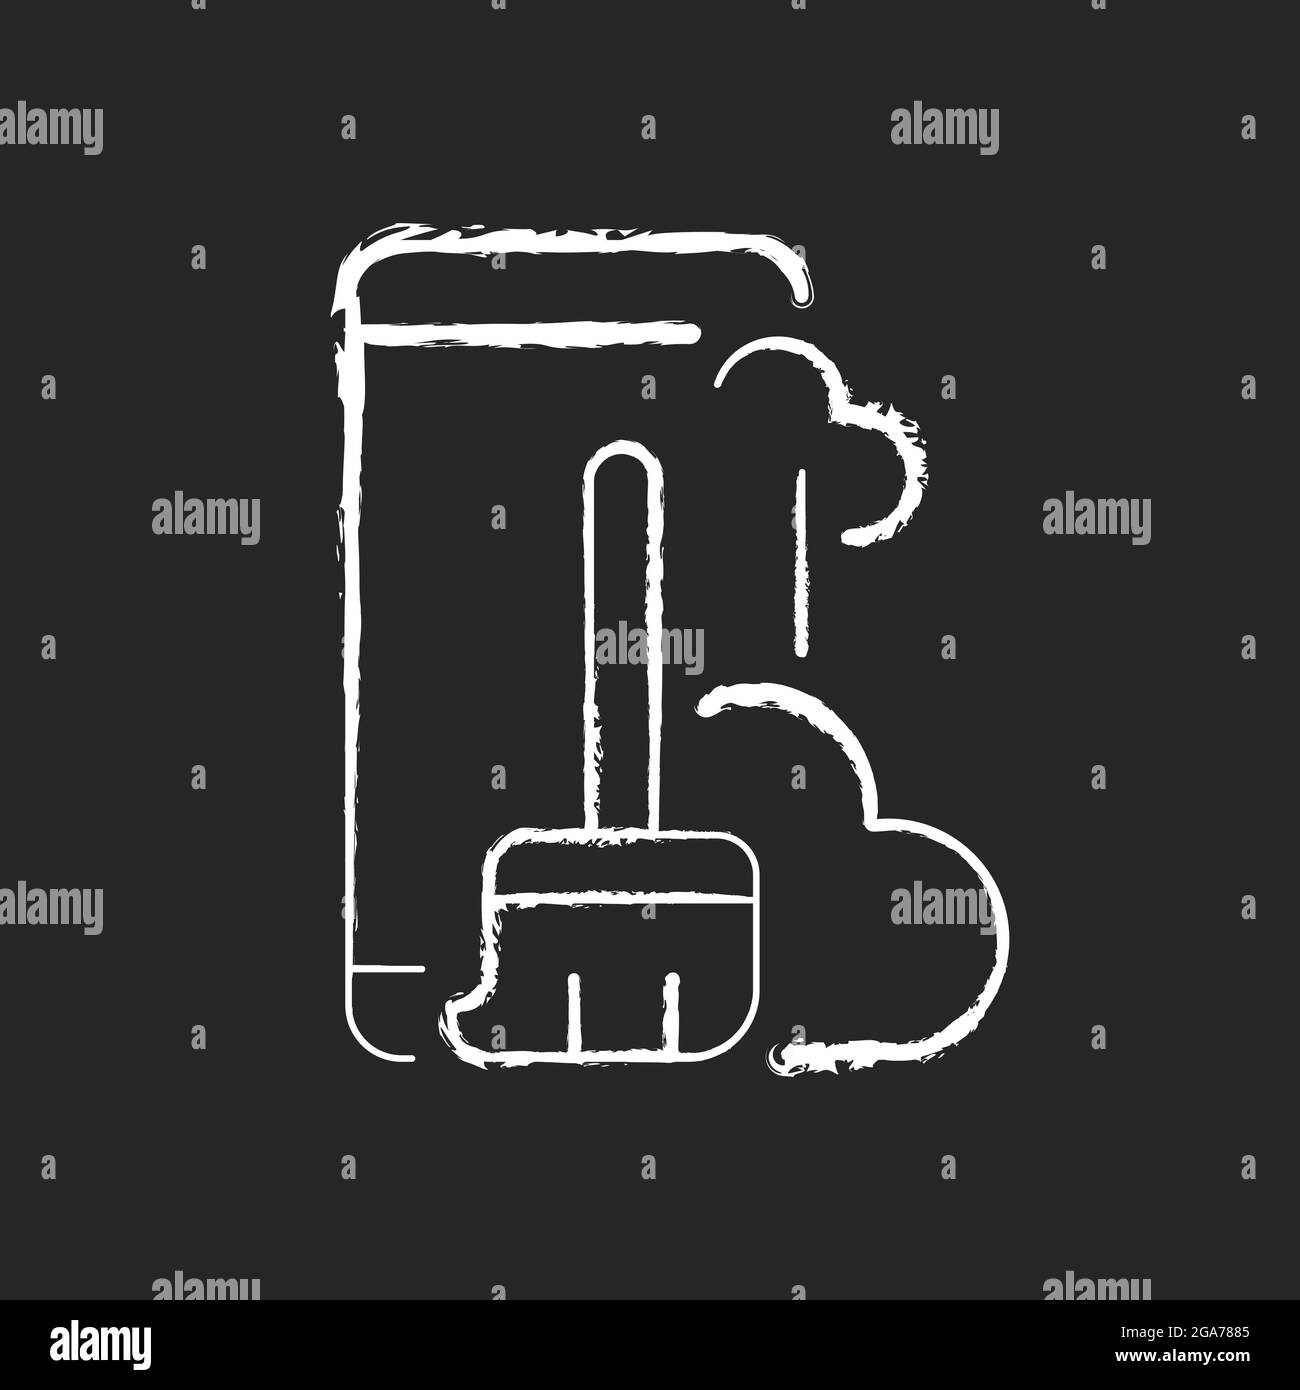 Dust and dirt inside the phone chalk white icon on dark background. Stock Vector